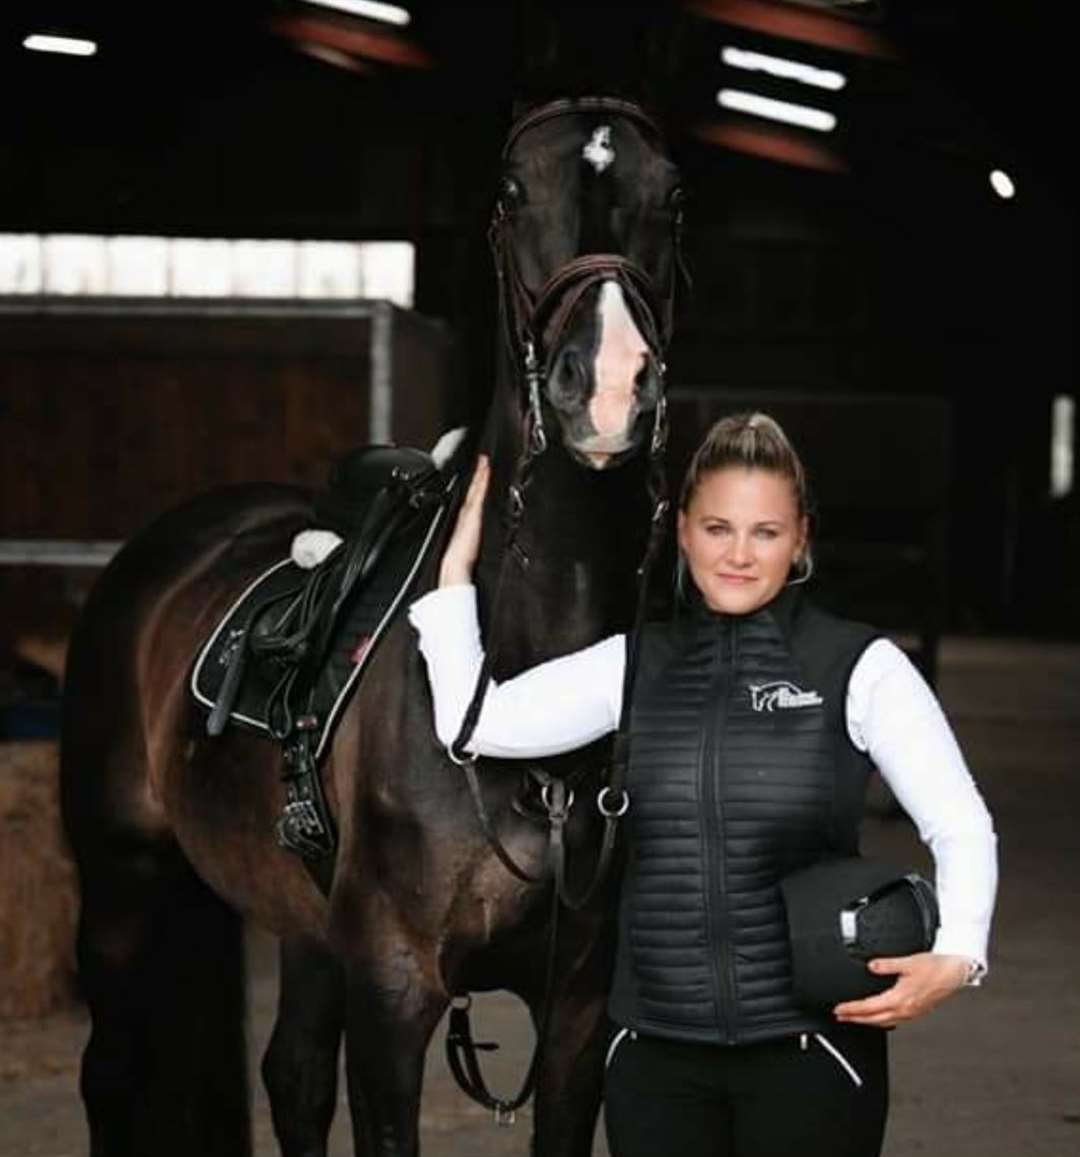 Philippa Wratten from Maidstone has been nominated for in the Horse and Hounds Awards 2020